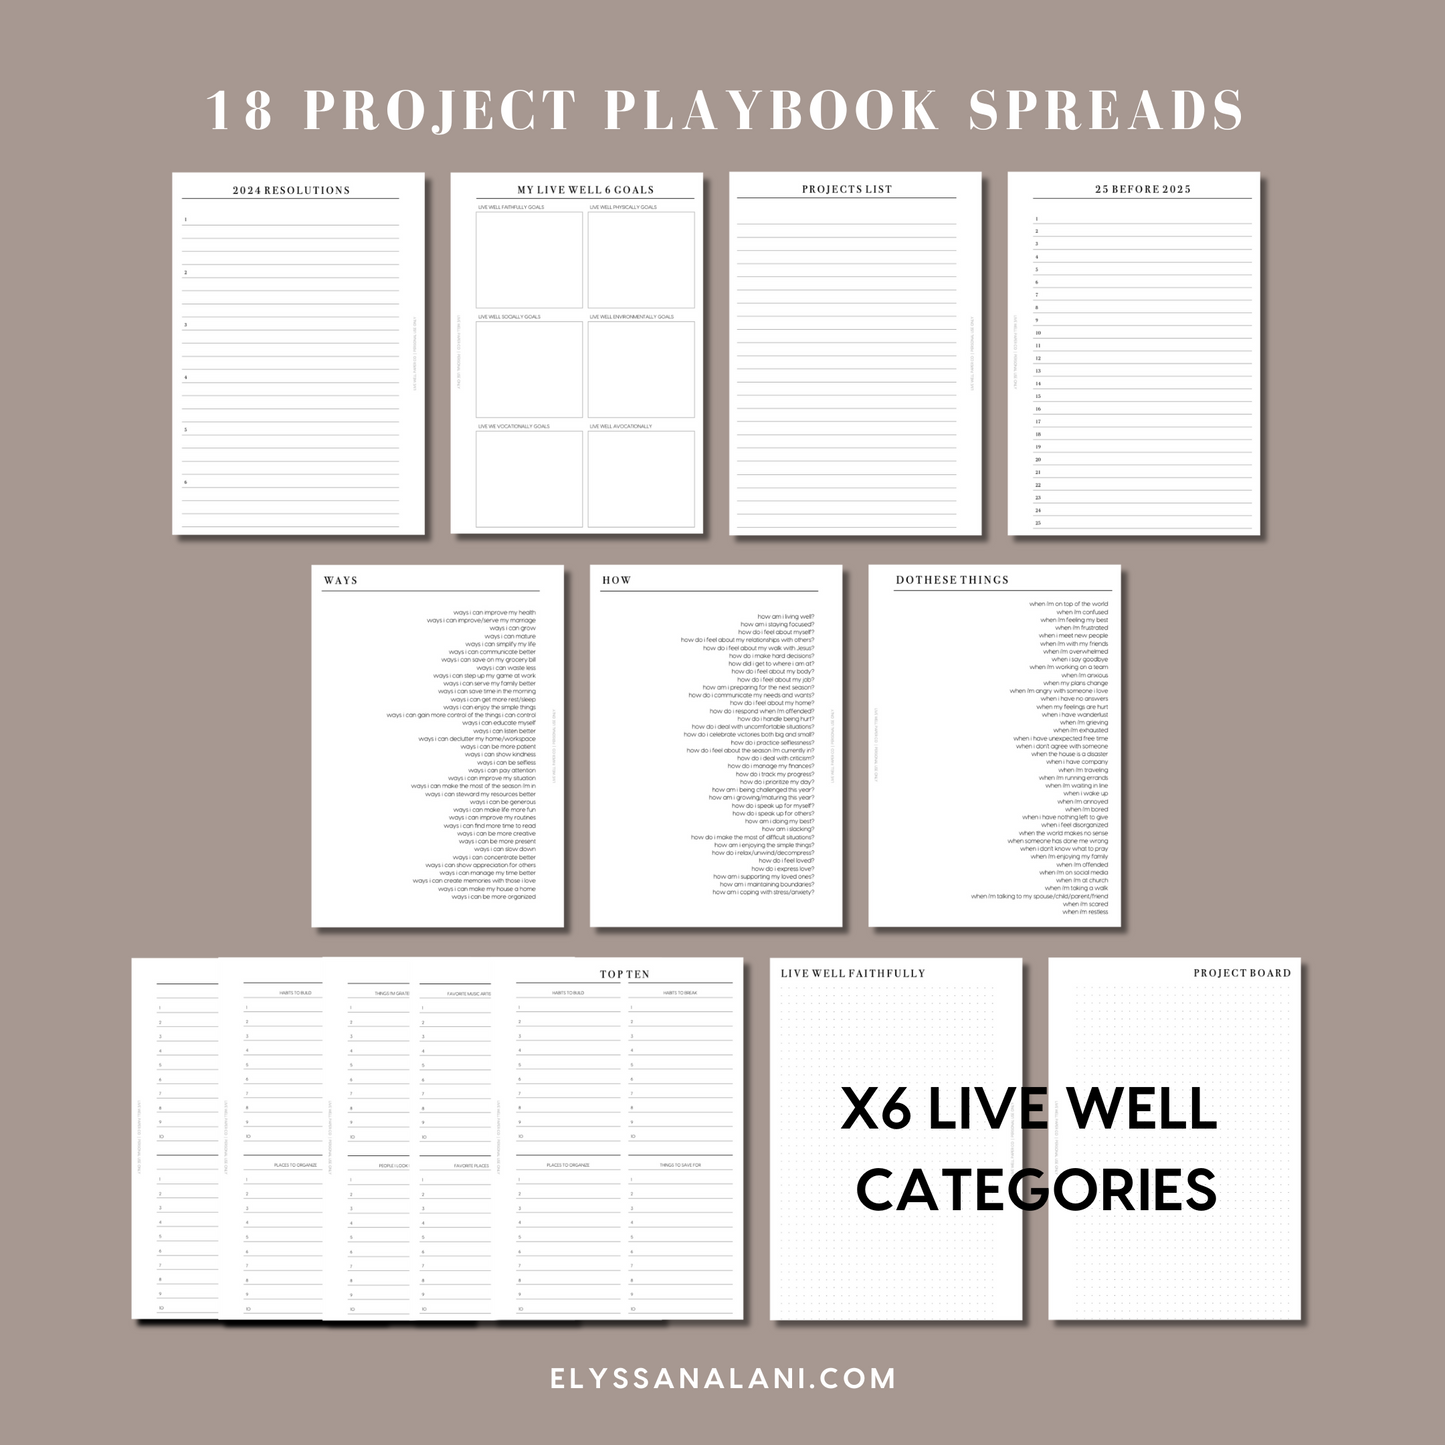 A5 LWSF Master Playbook & Planner